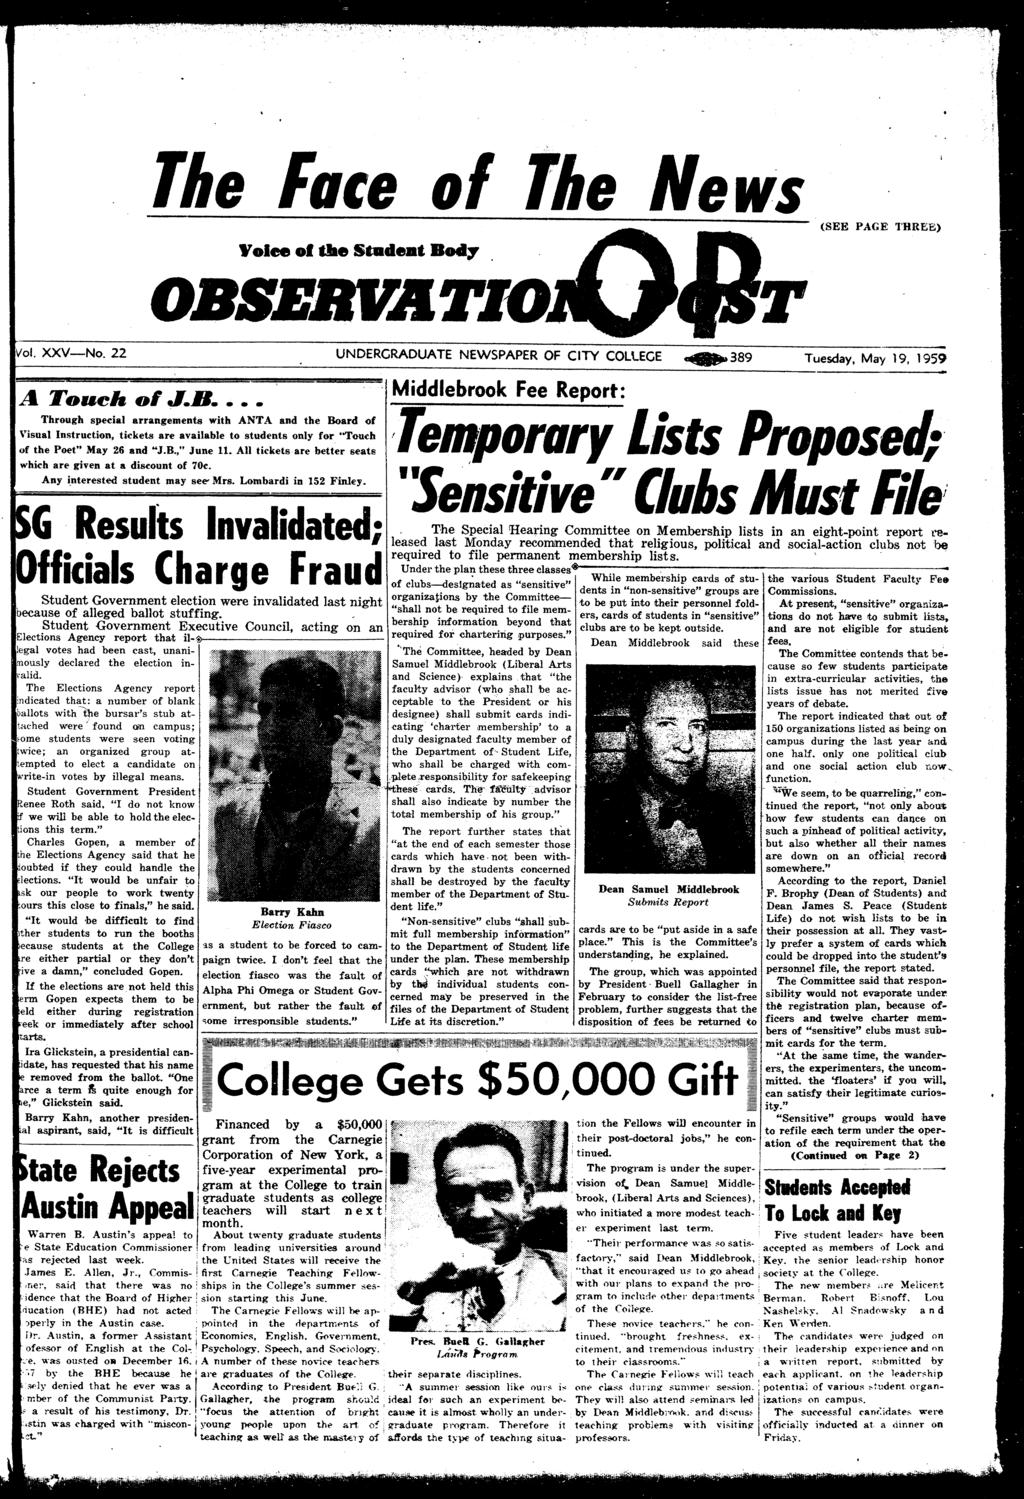 The Face of The News Voce of the Student Body OBSERVATIO. QqsT (SEE PAGE THREE) Vol. XXV No. 22 UNDERGRADUATE NEWSPAPER OF CITY COLUCE 389 Tuesday, May 19, 1959 A Taueh of J.B.... Through specal arrangements wth ANTA and the Board of Vsual Instructon, tckets are avalable to students only for "Touch of the Poet" May 26 and "J.